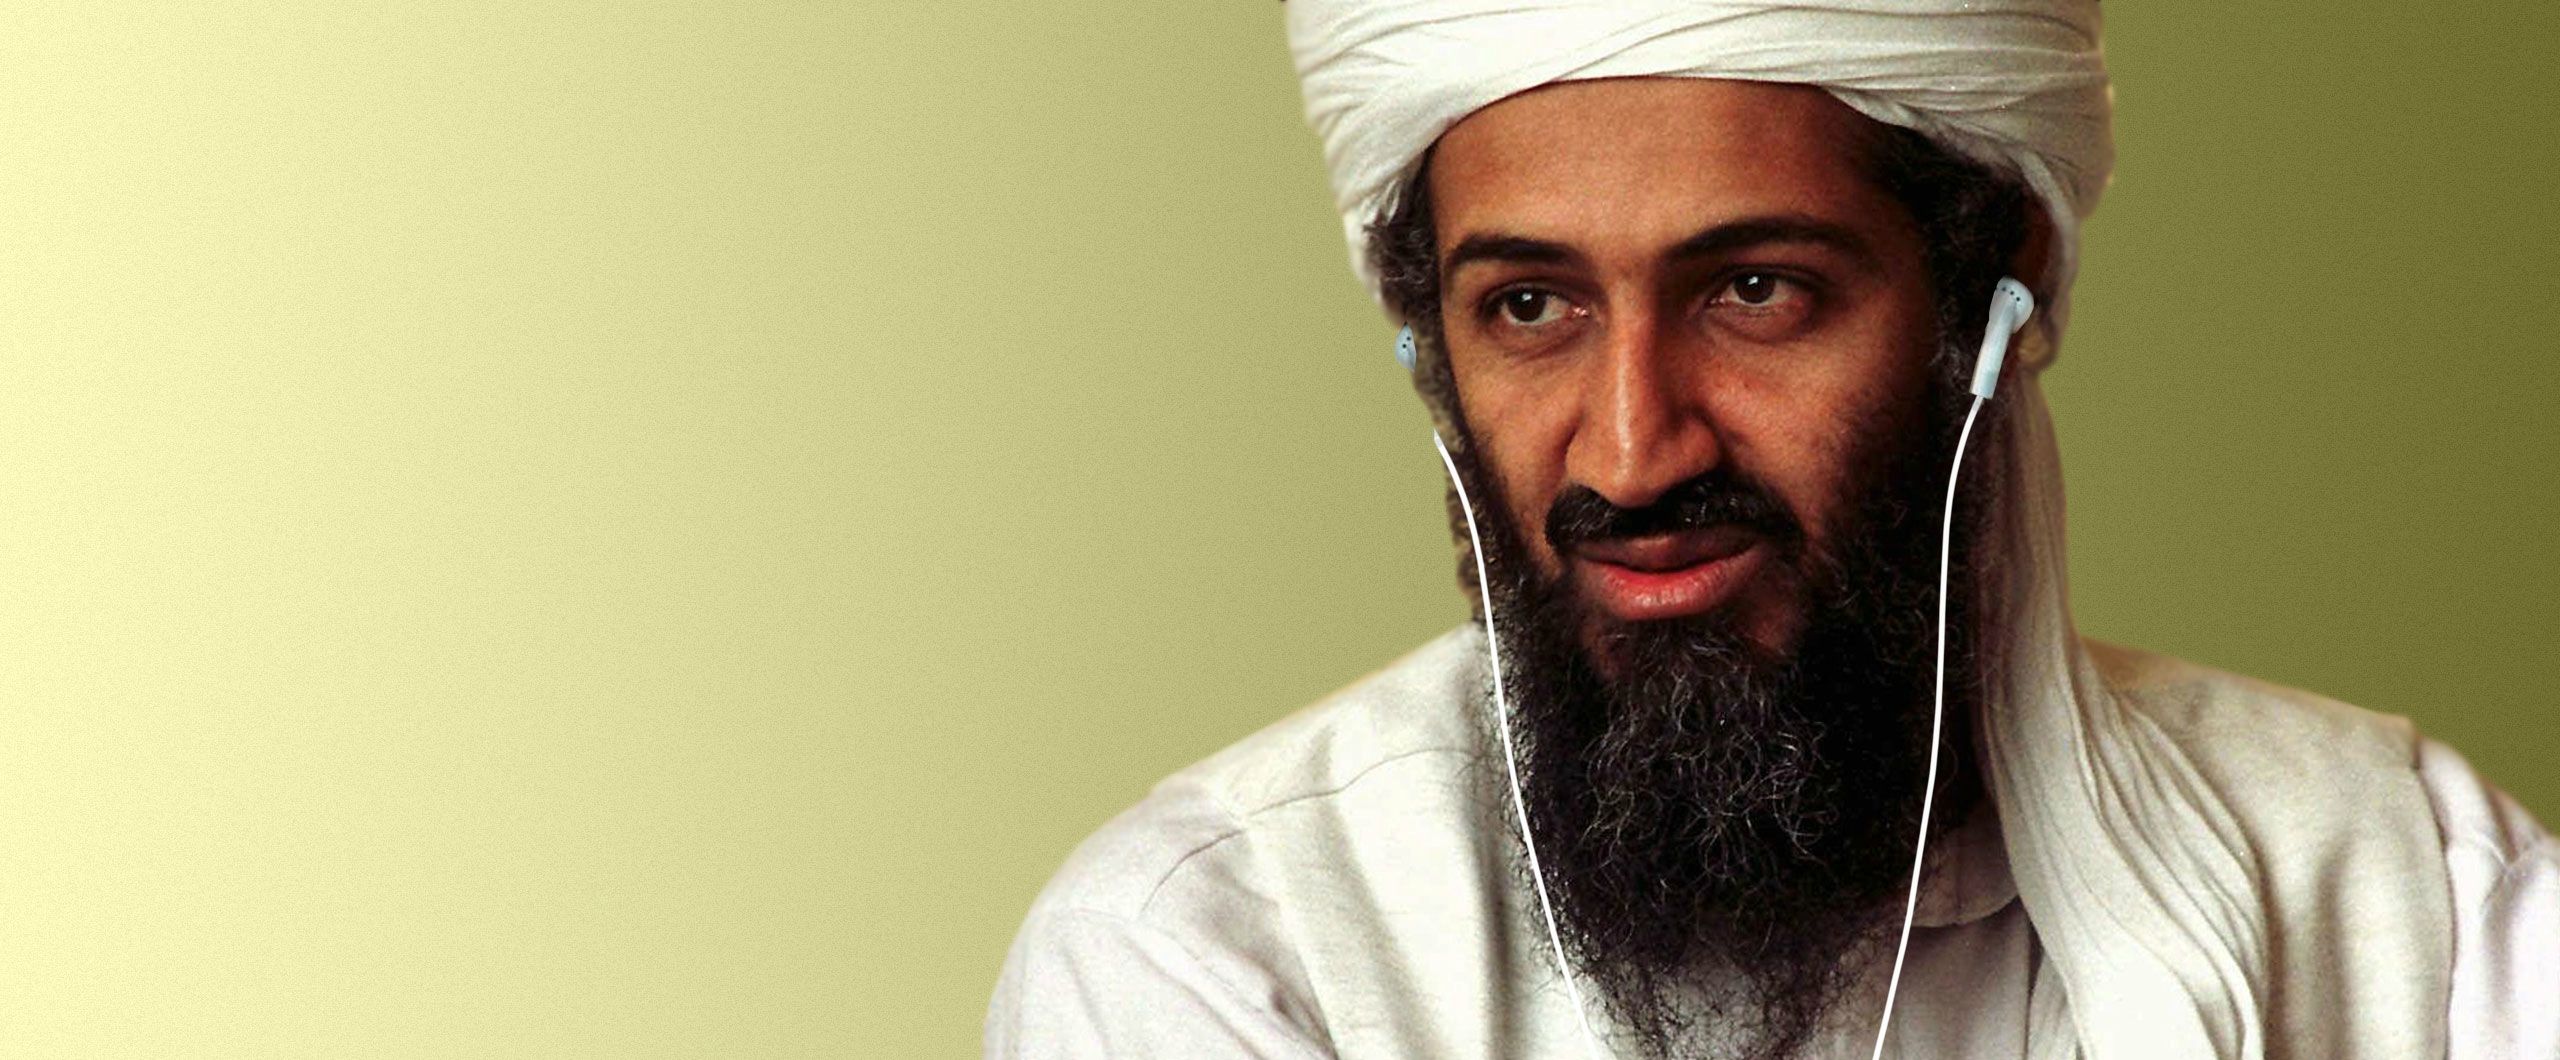 Who Did Osama bin Laden Jam Out To? Enrico Macias, the Jewish-Algerian  Songwriter - Tablet Magazine